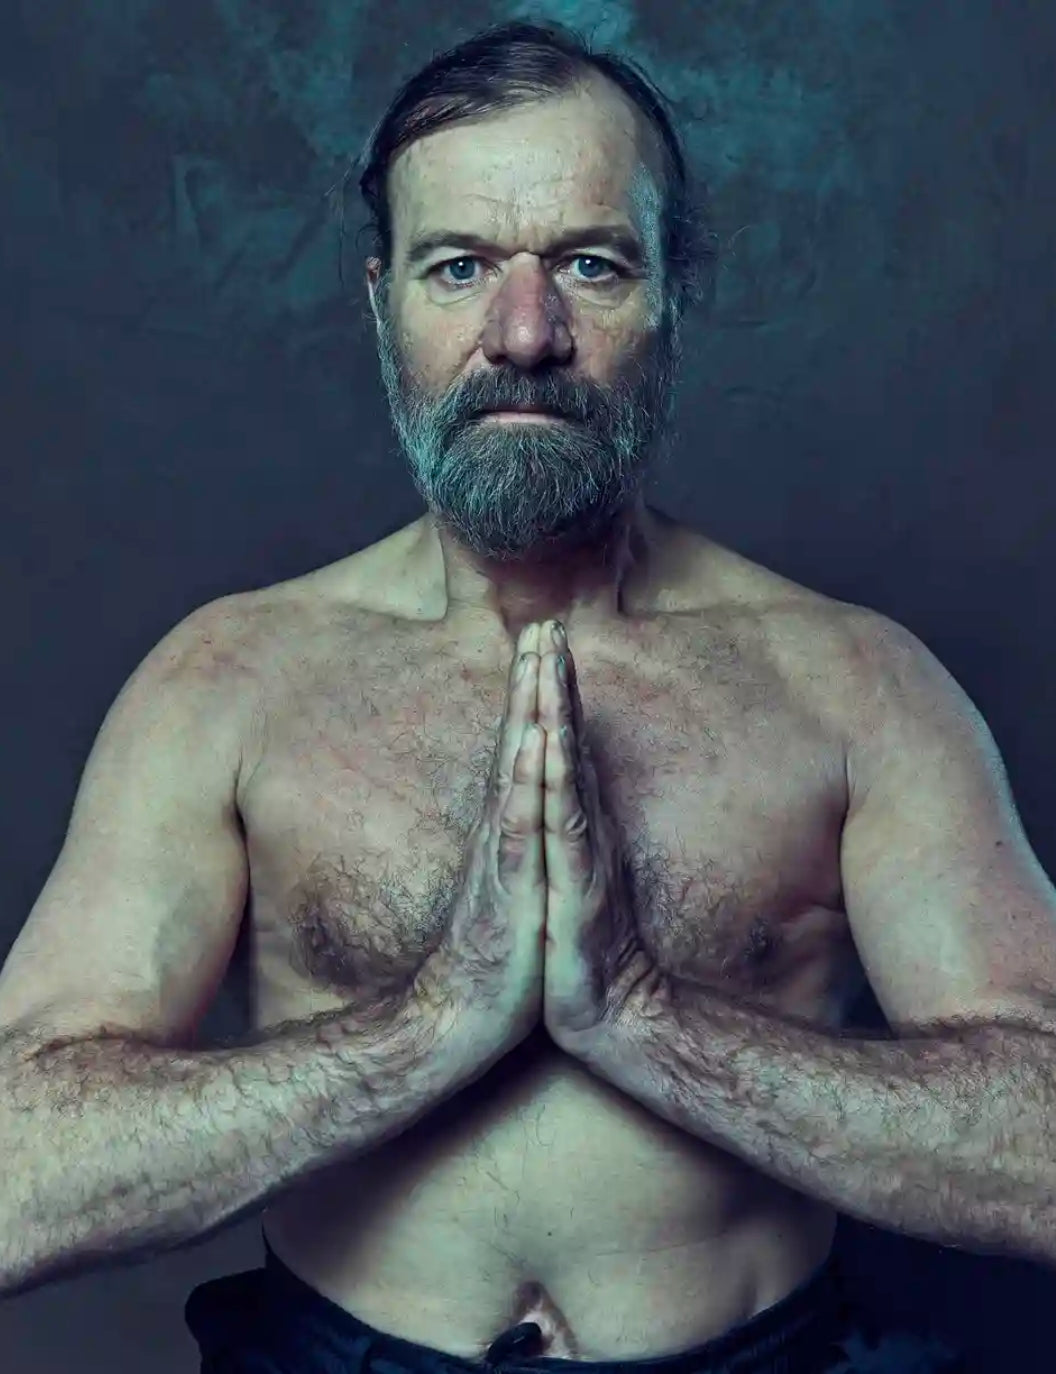 Wim Hof Method : Techniques, Benefits, and Safety